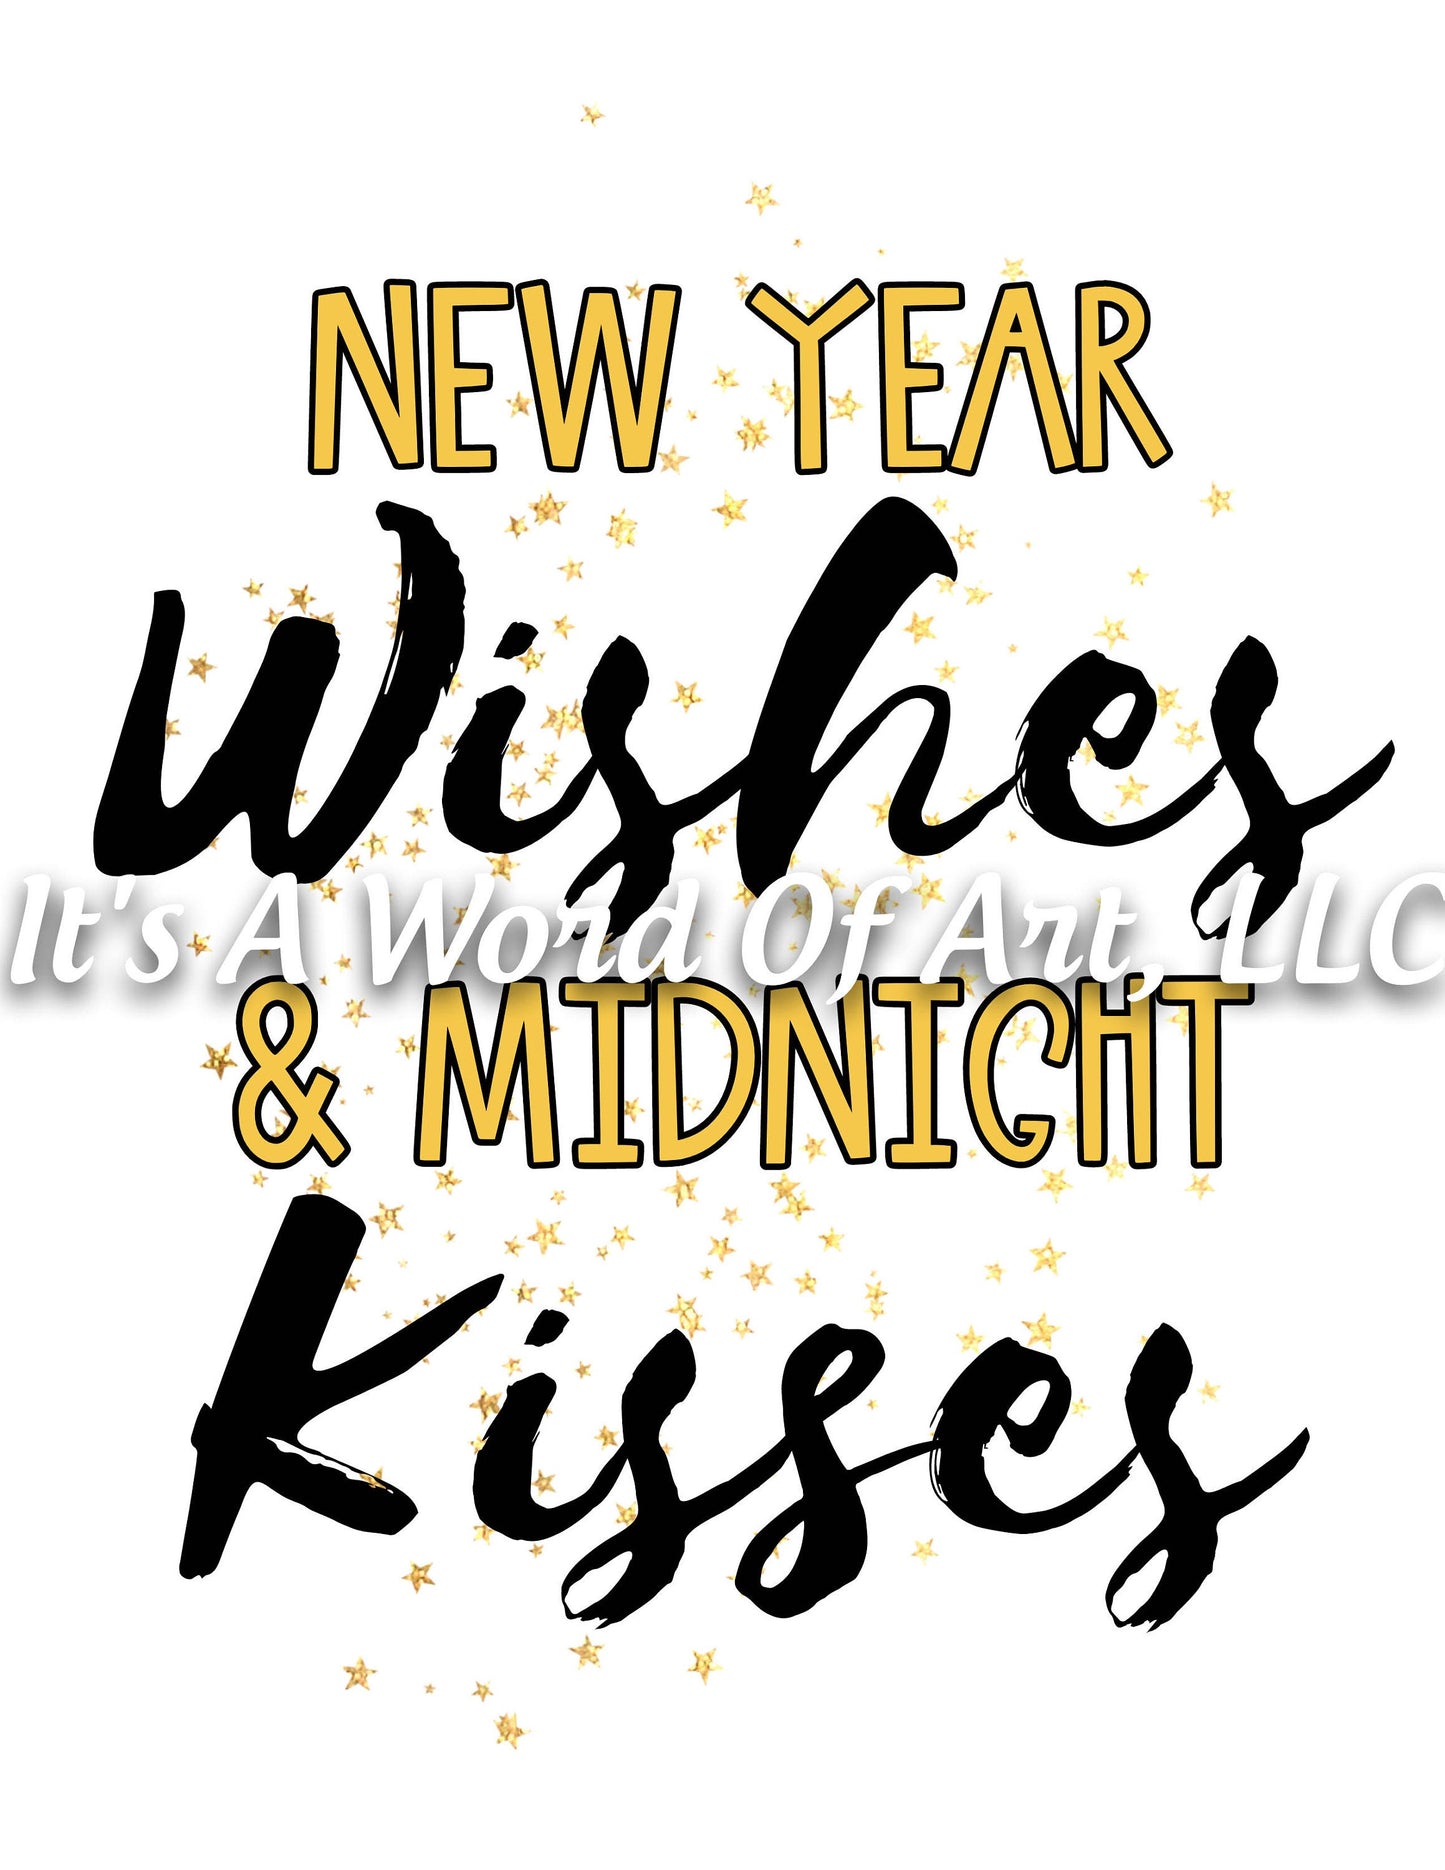 New Years 1 - New Year Wishes & Midnight Kisses 2020 - Sublimation Transfer Set/Ready To Press Sublimation Transfer/Sublimation Transfer